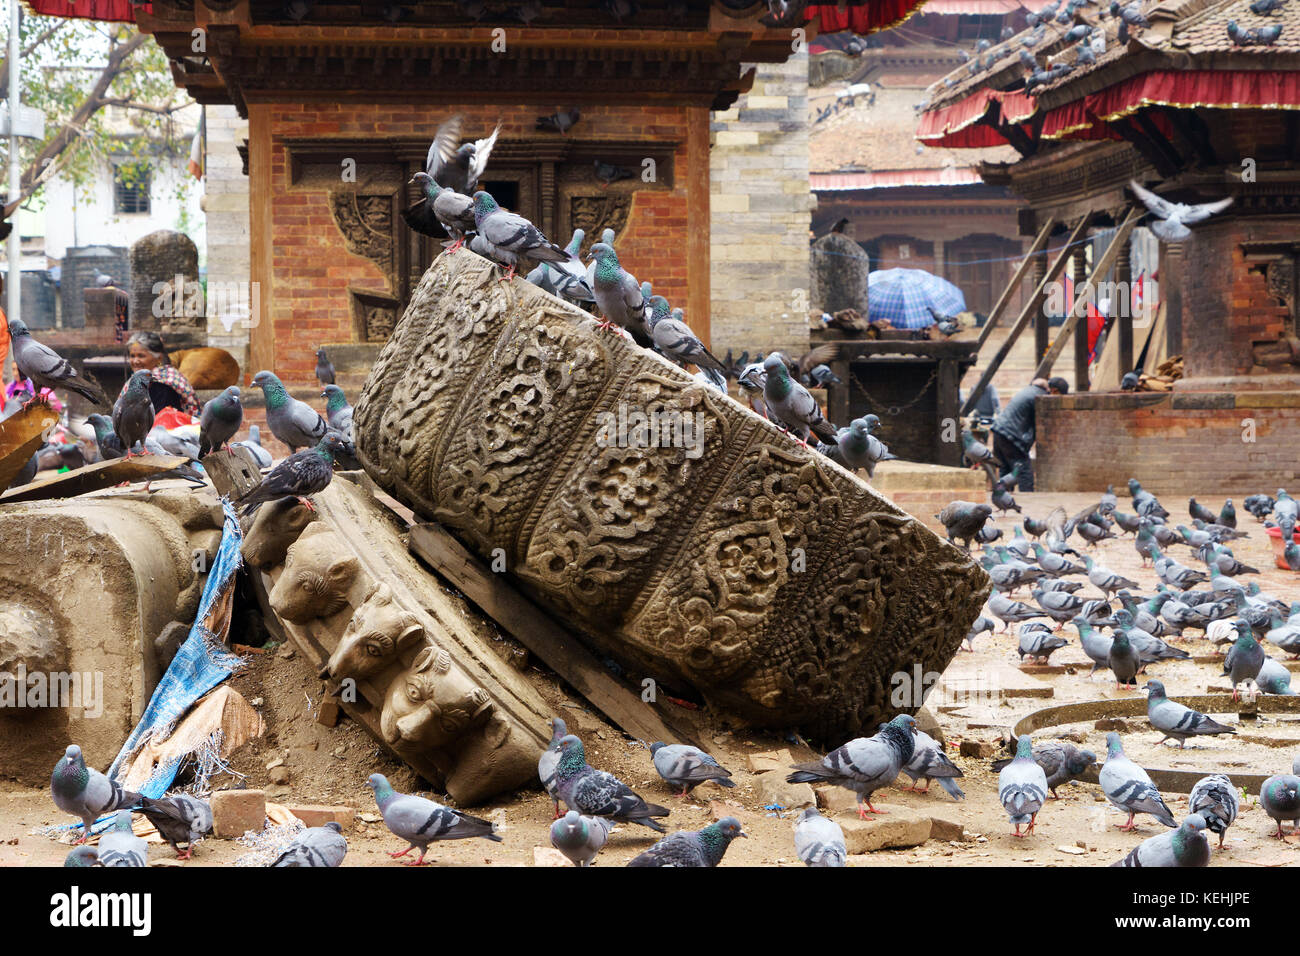 Pigeons amongst the remains of a pagoda left by the 2015 earthquake. Durbar Square, Kathmandu, Nepal. Stock Photo